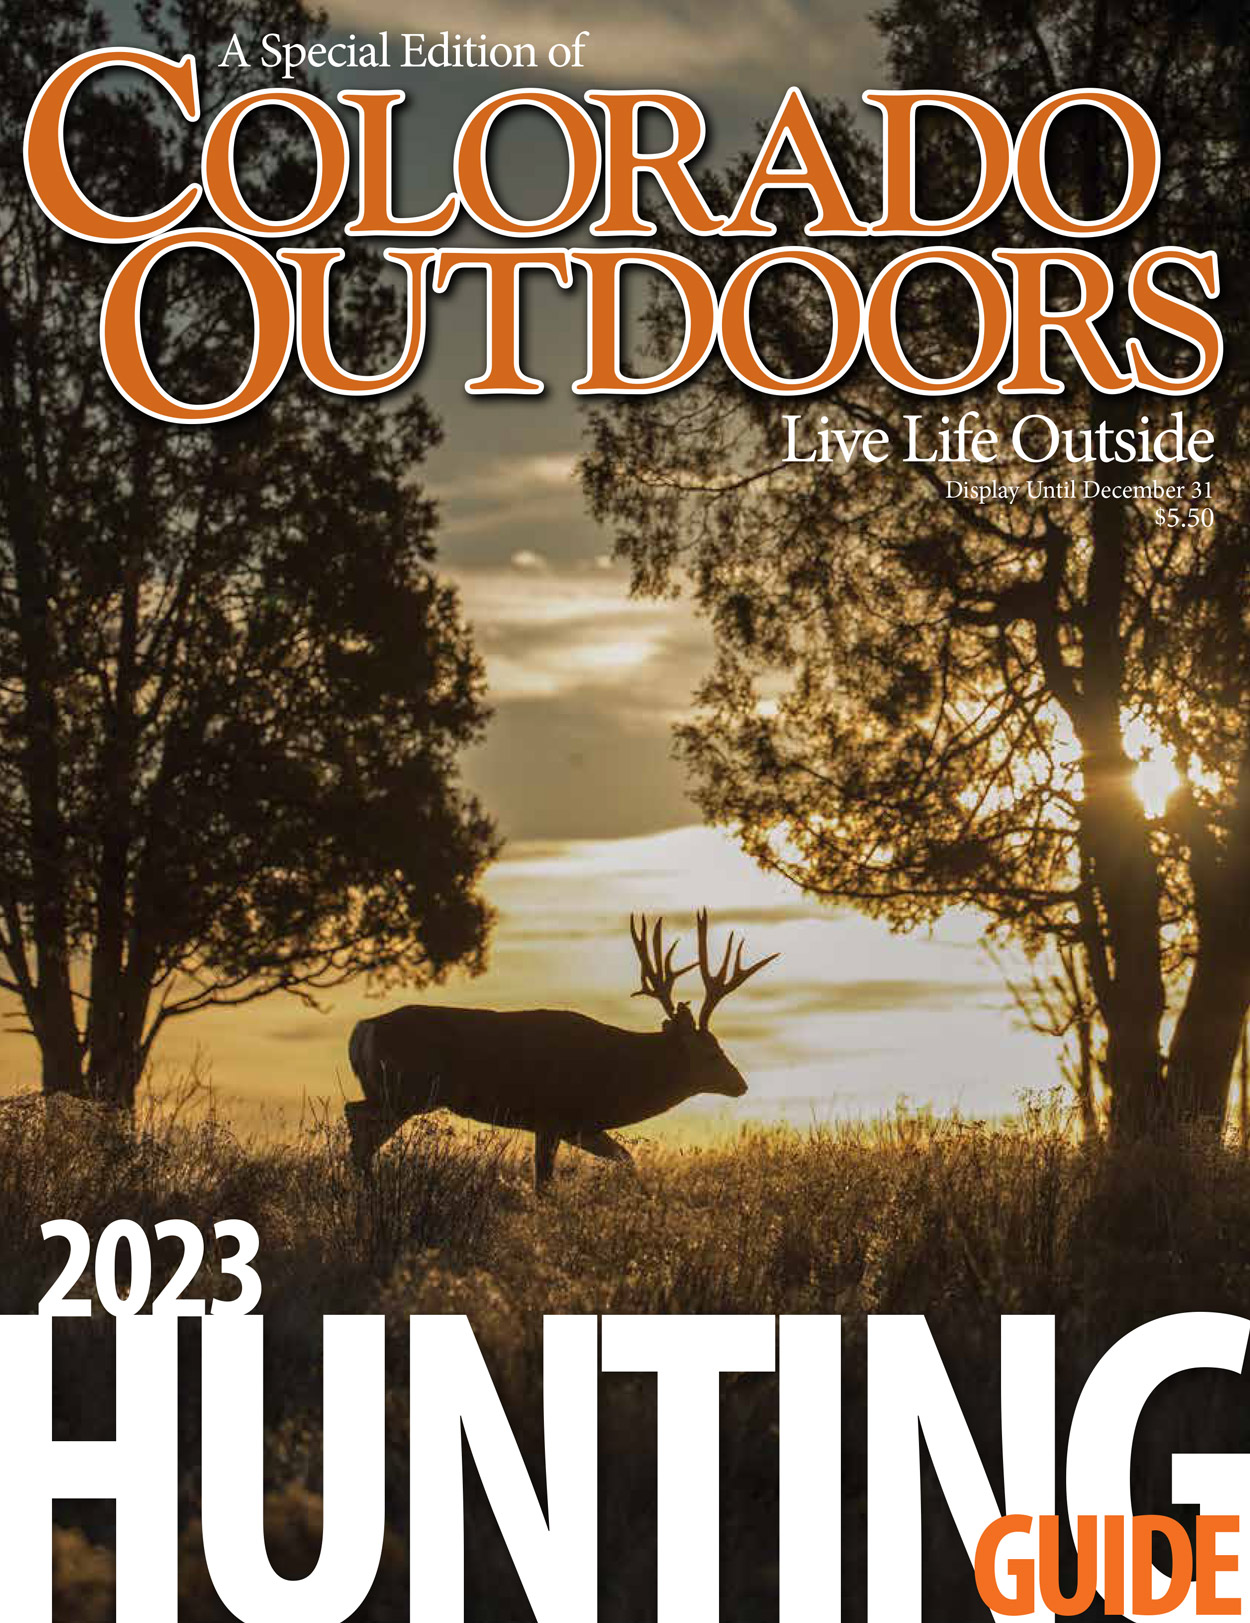 Hunt Guide cover